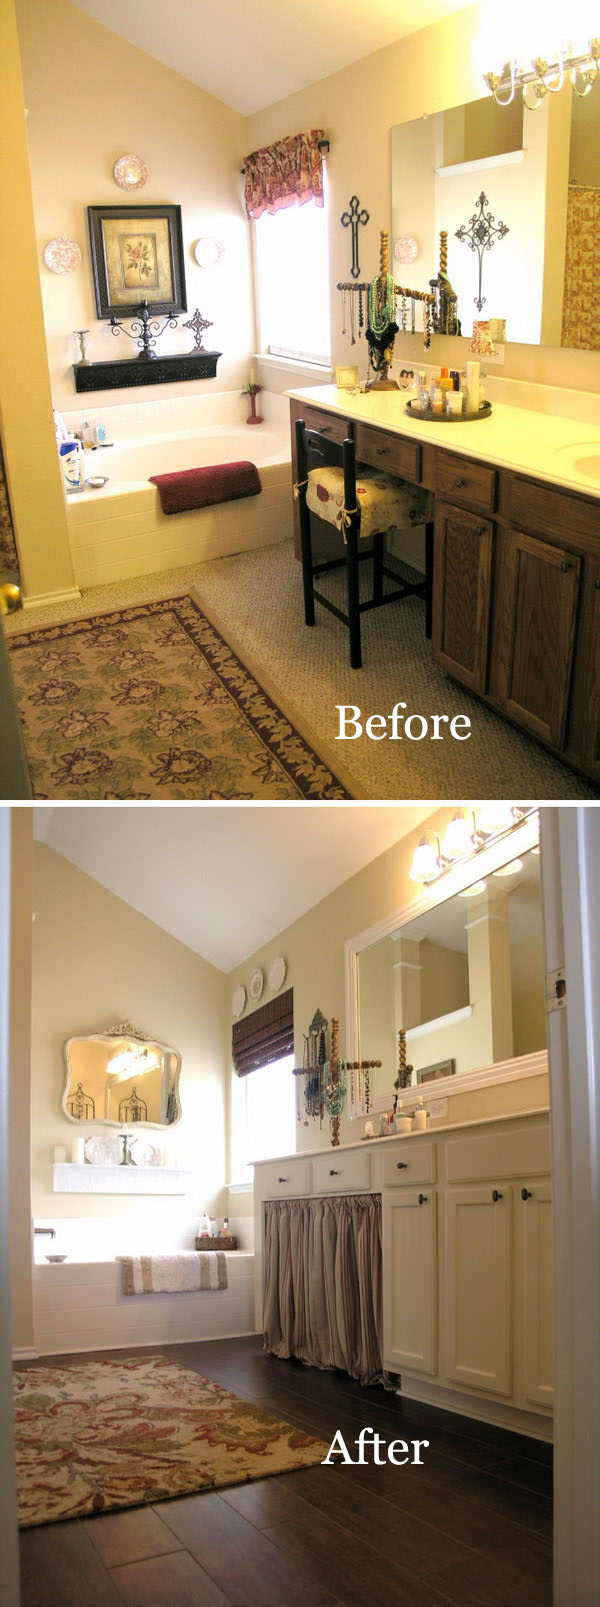 31-32-bathroom-remodel-before-and-after